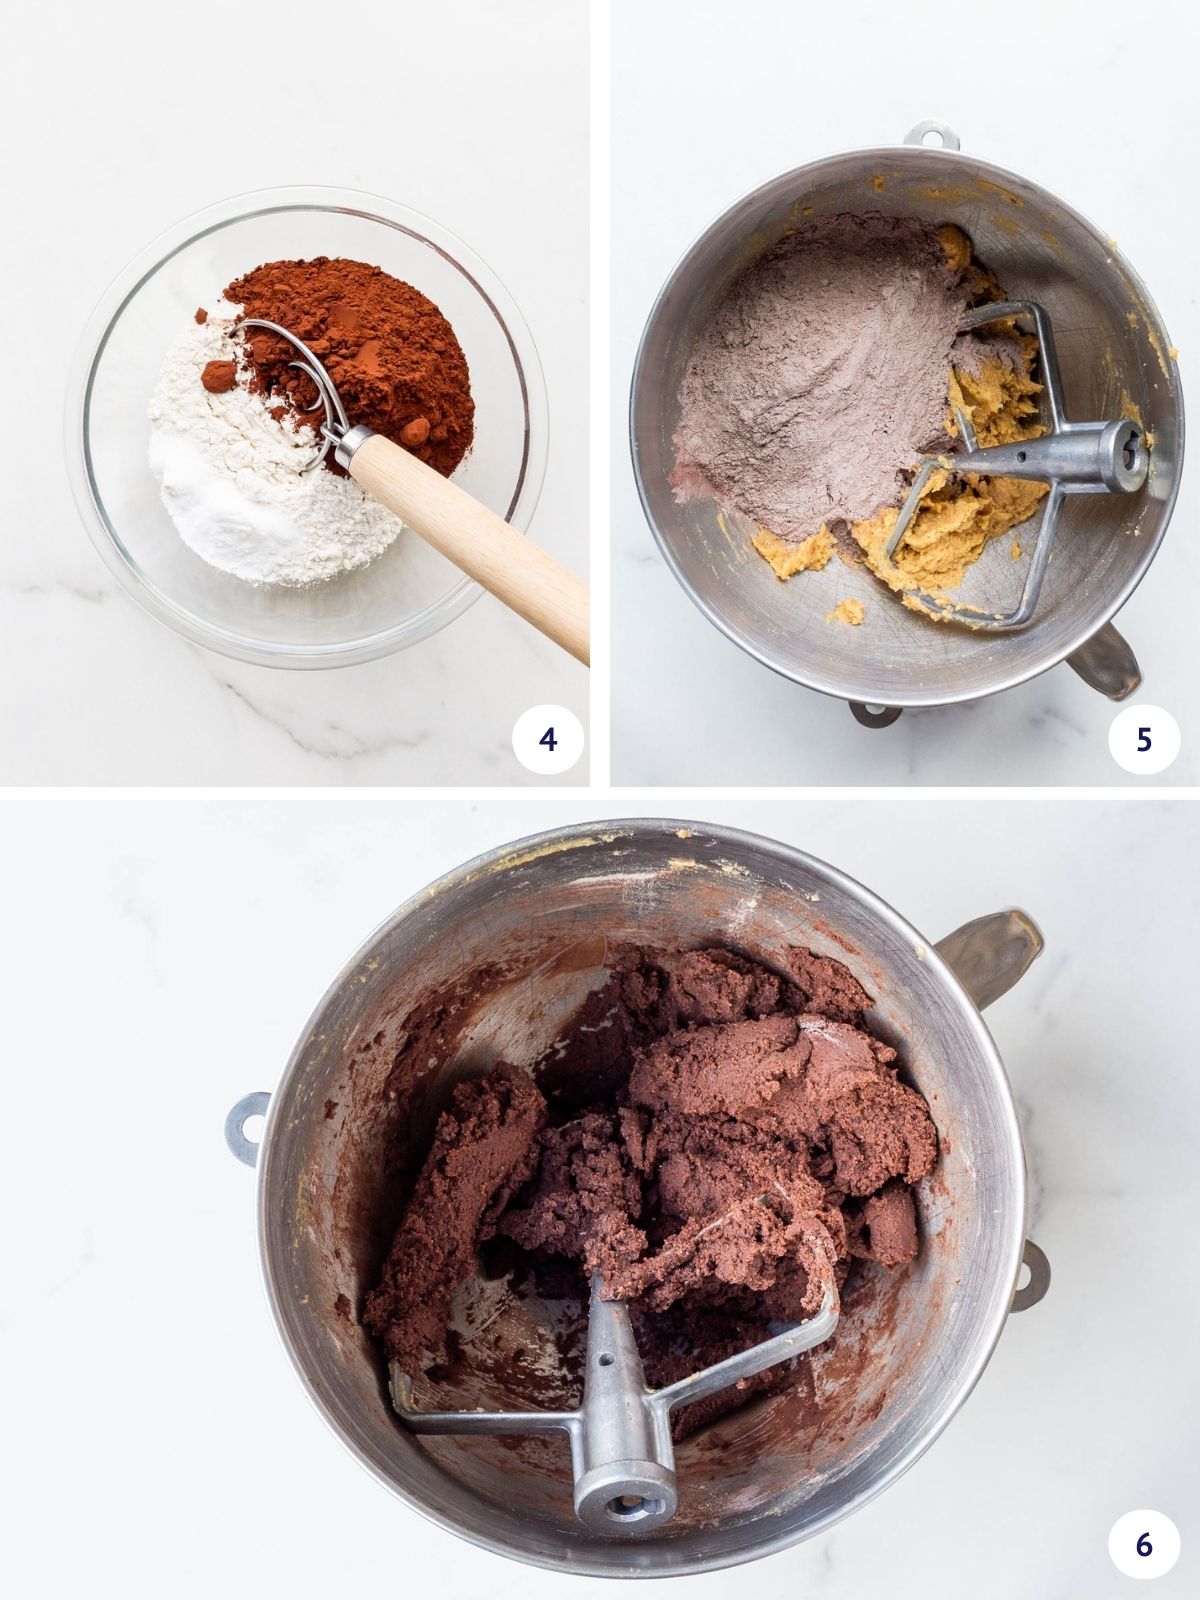 Collage of images to show whisking dry ingredients together and then incorporating them with creamed butter, sugar, and eggs in stand mixer bowl to make chocolate sugar cookie dough.